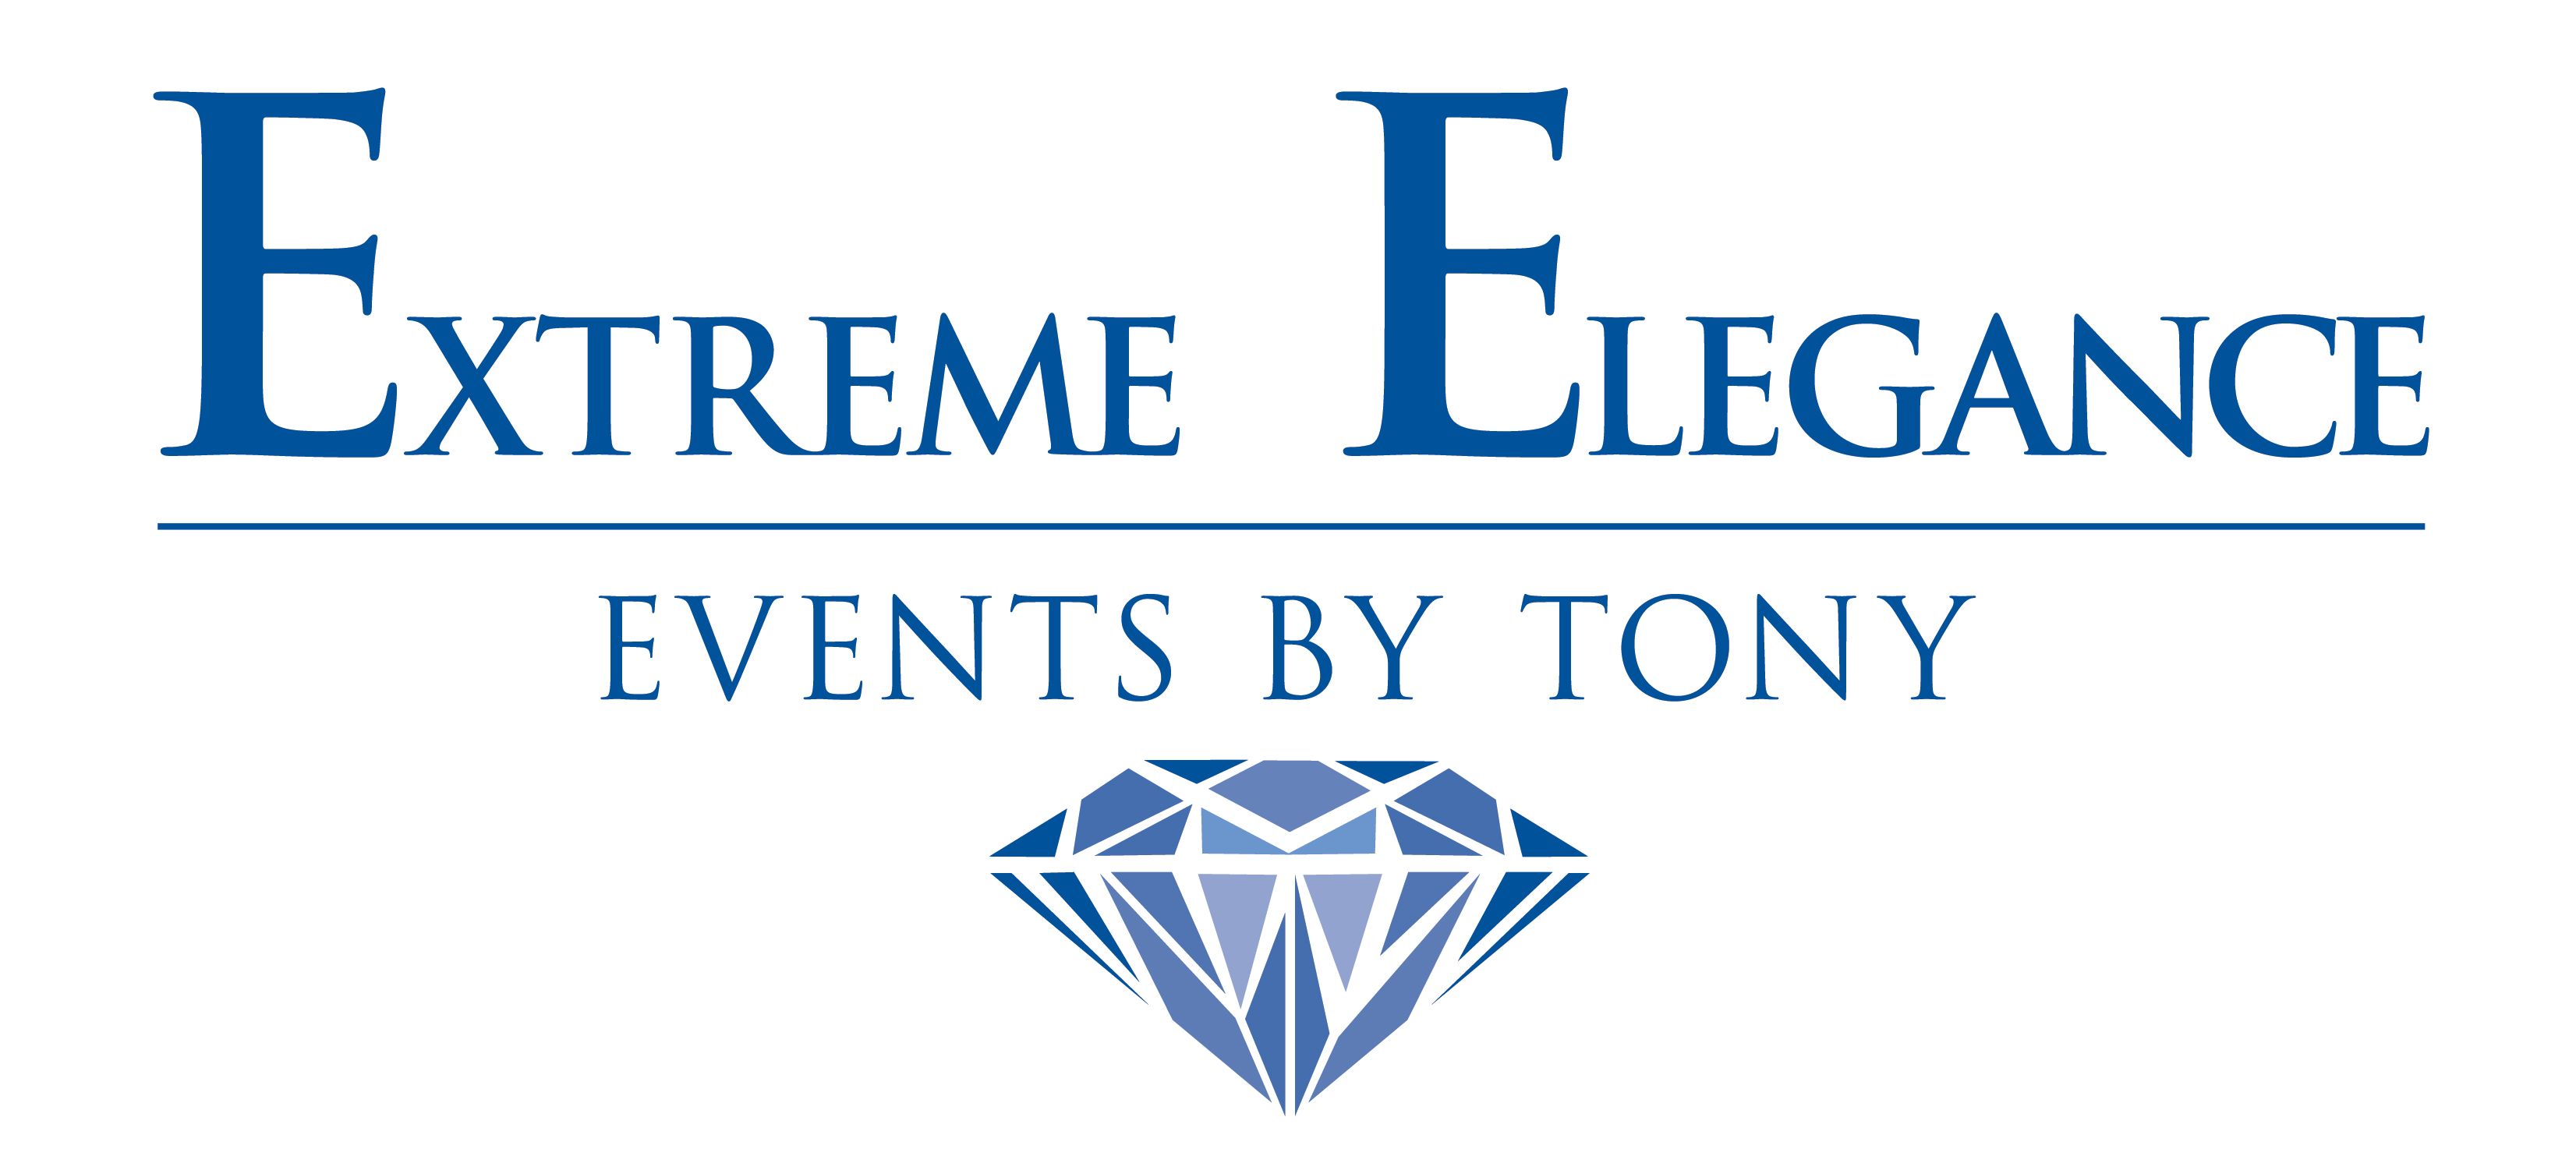 Extreme Elegance Events By Tony